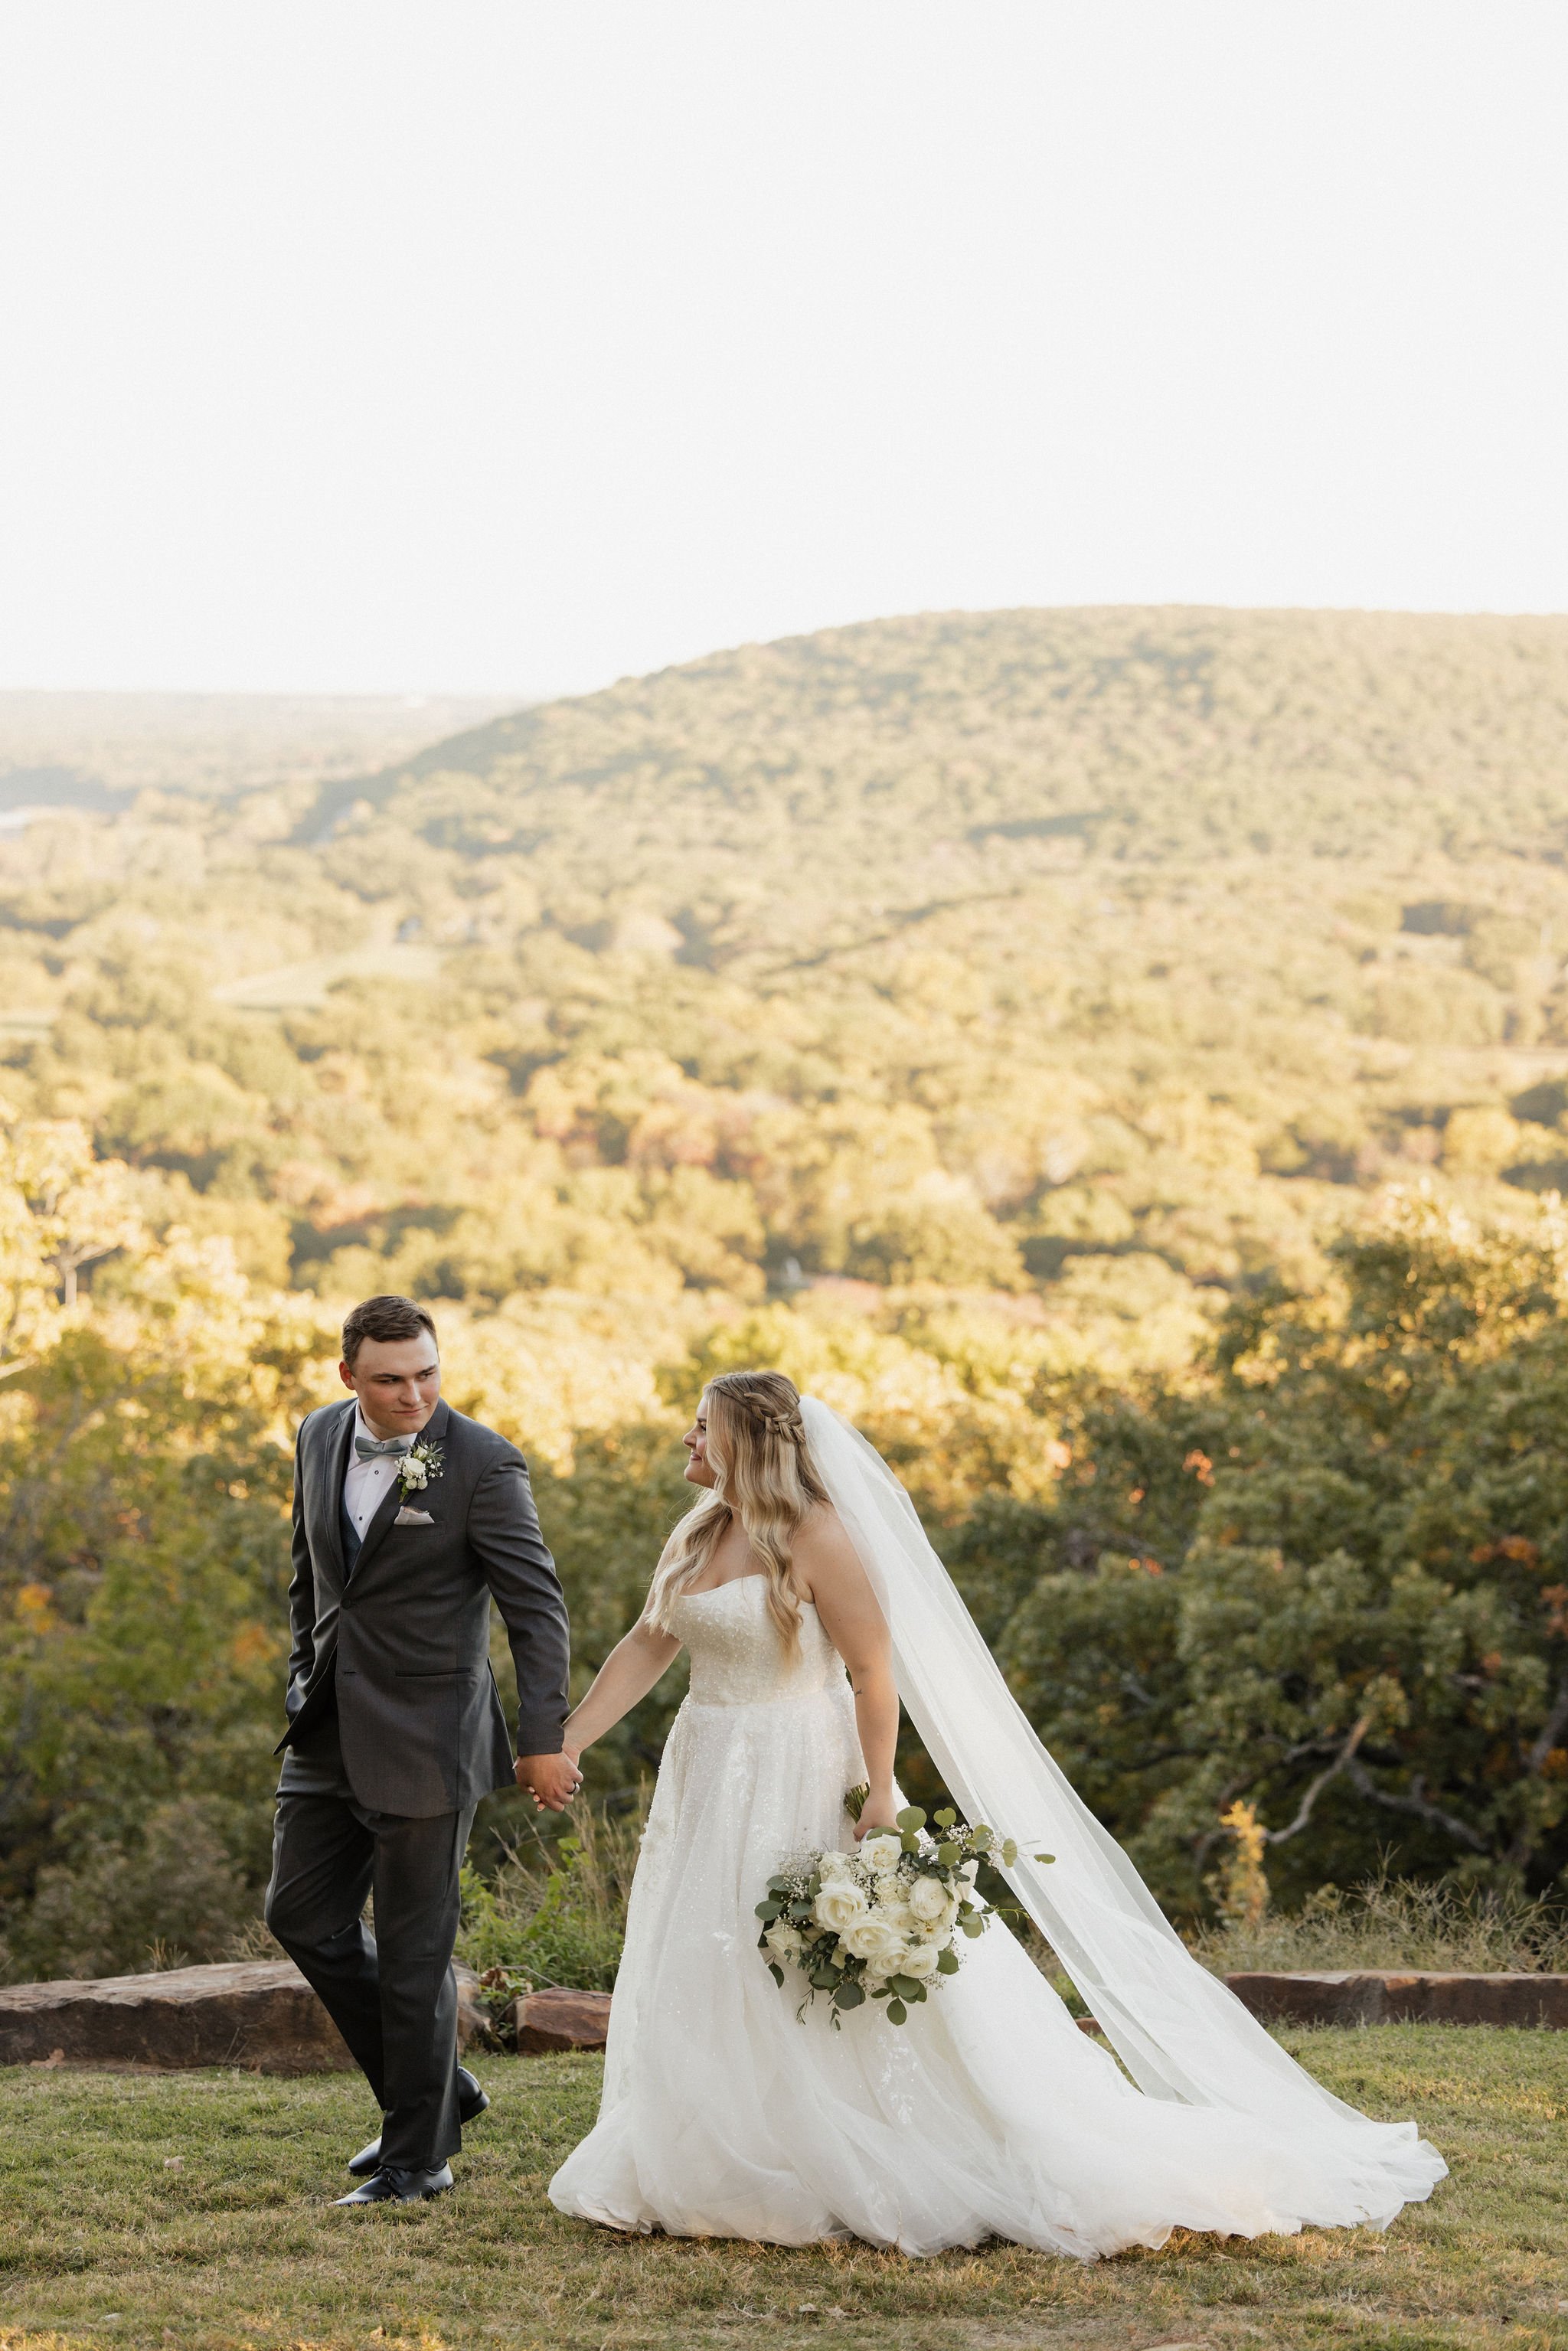 Mountain Crest Venue Upgraded Rental at Dream Point Ranch Destination Weddings with a View (87).jpg